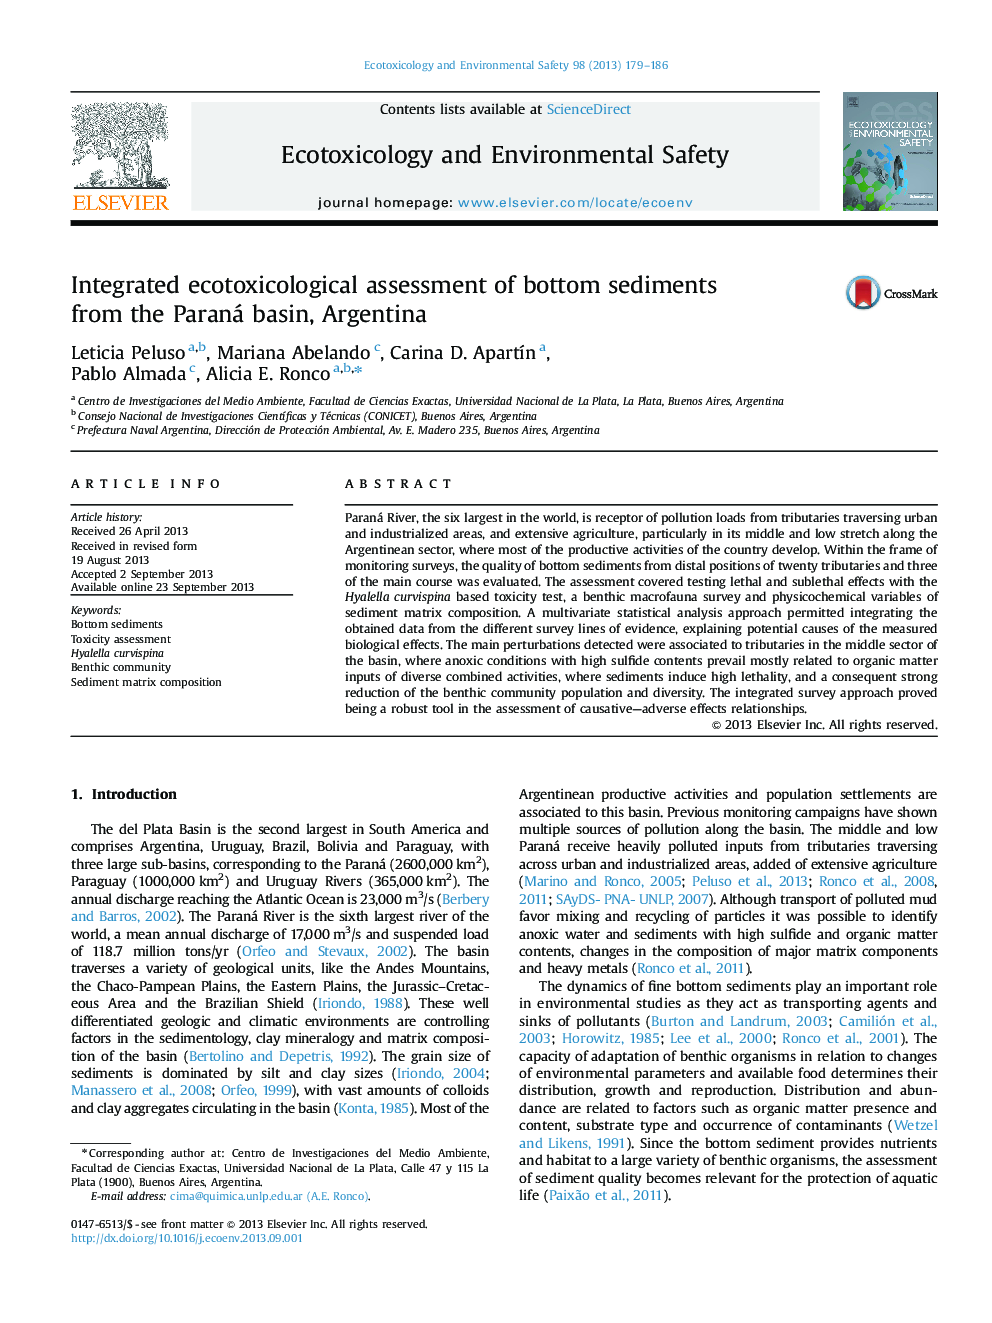 Integrated ecotoxicological assessment of bottom sediments from the Paraná basin, Argentina